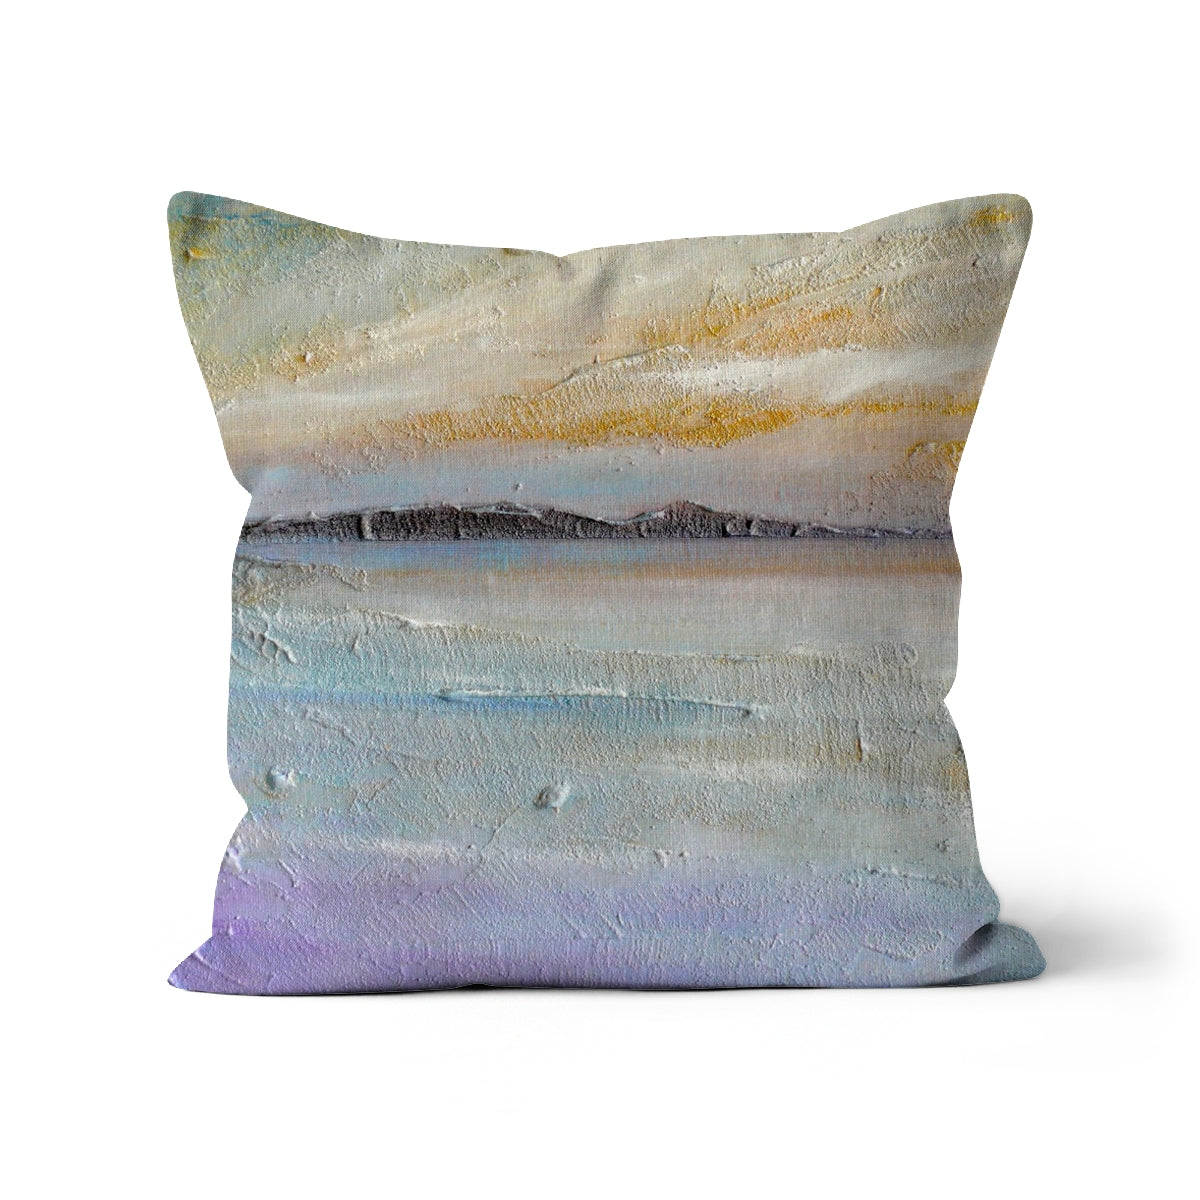 Sollas Beach South Uist Art Gifts Cushion-Cushions-Hebridean Islands Art Gallery-Canvas-12"x12"-Paintings, Prints, Homeware, Art Gifts From Scotland By Scottish Artist Kevin Hunter